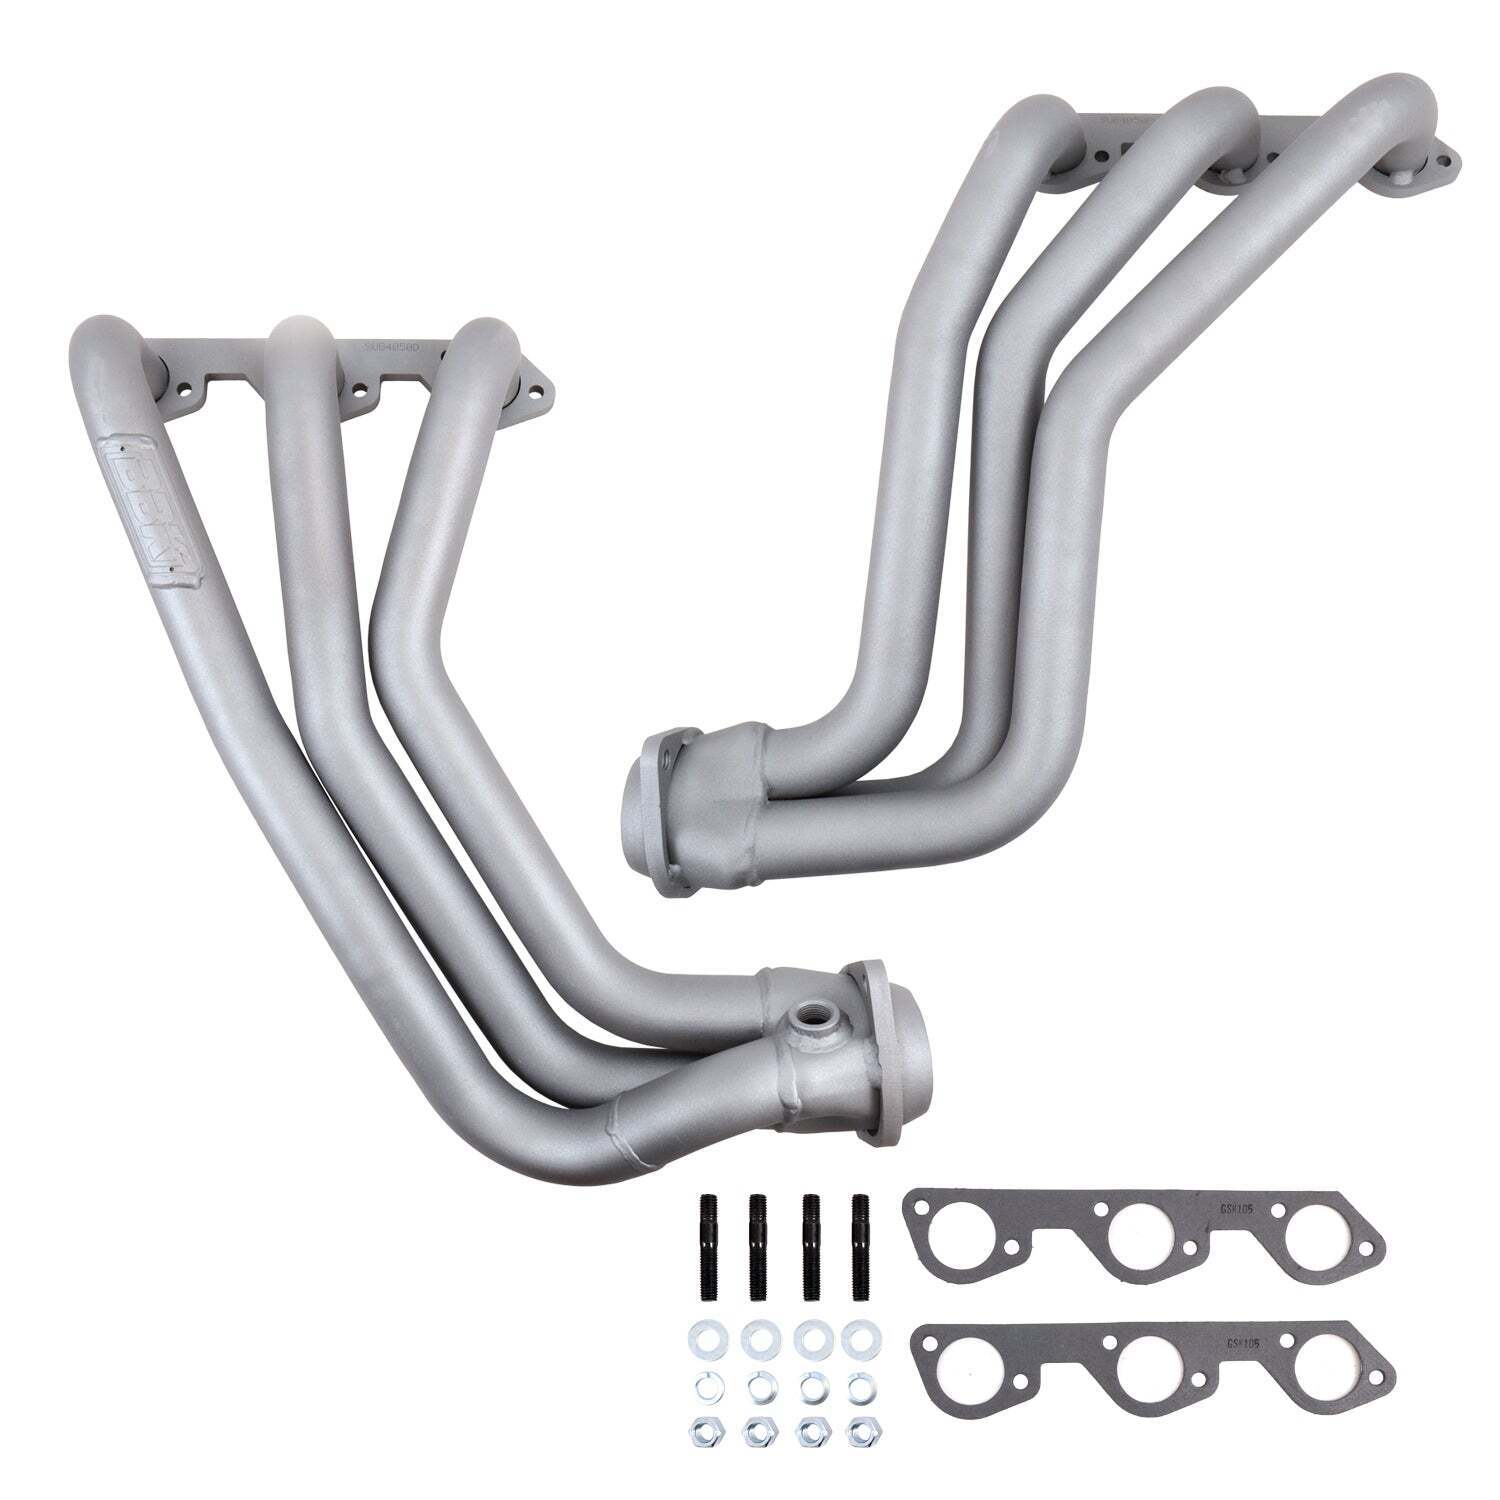 Jeep Wrangler 3.8 1-5/8 Long Tube Exhaust Headers With High Flow Cats Titanium C